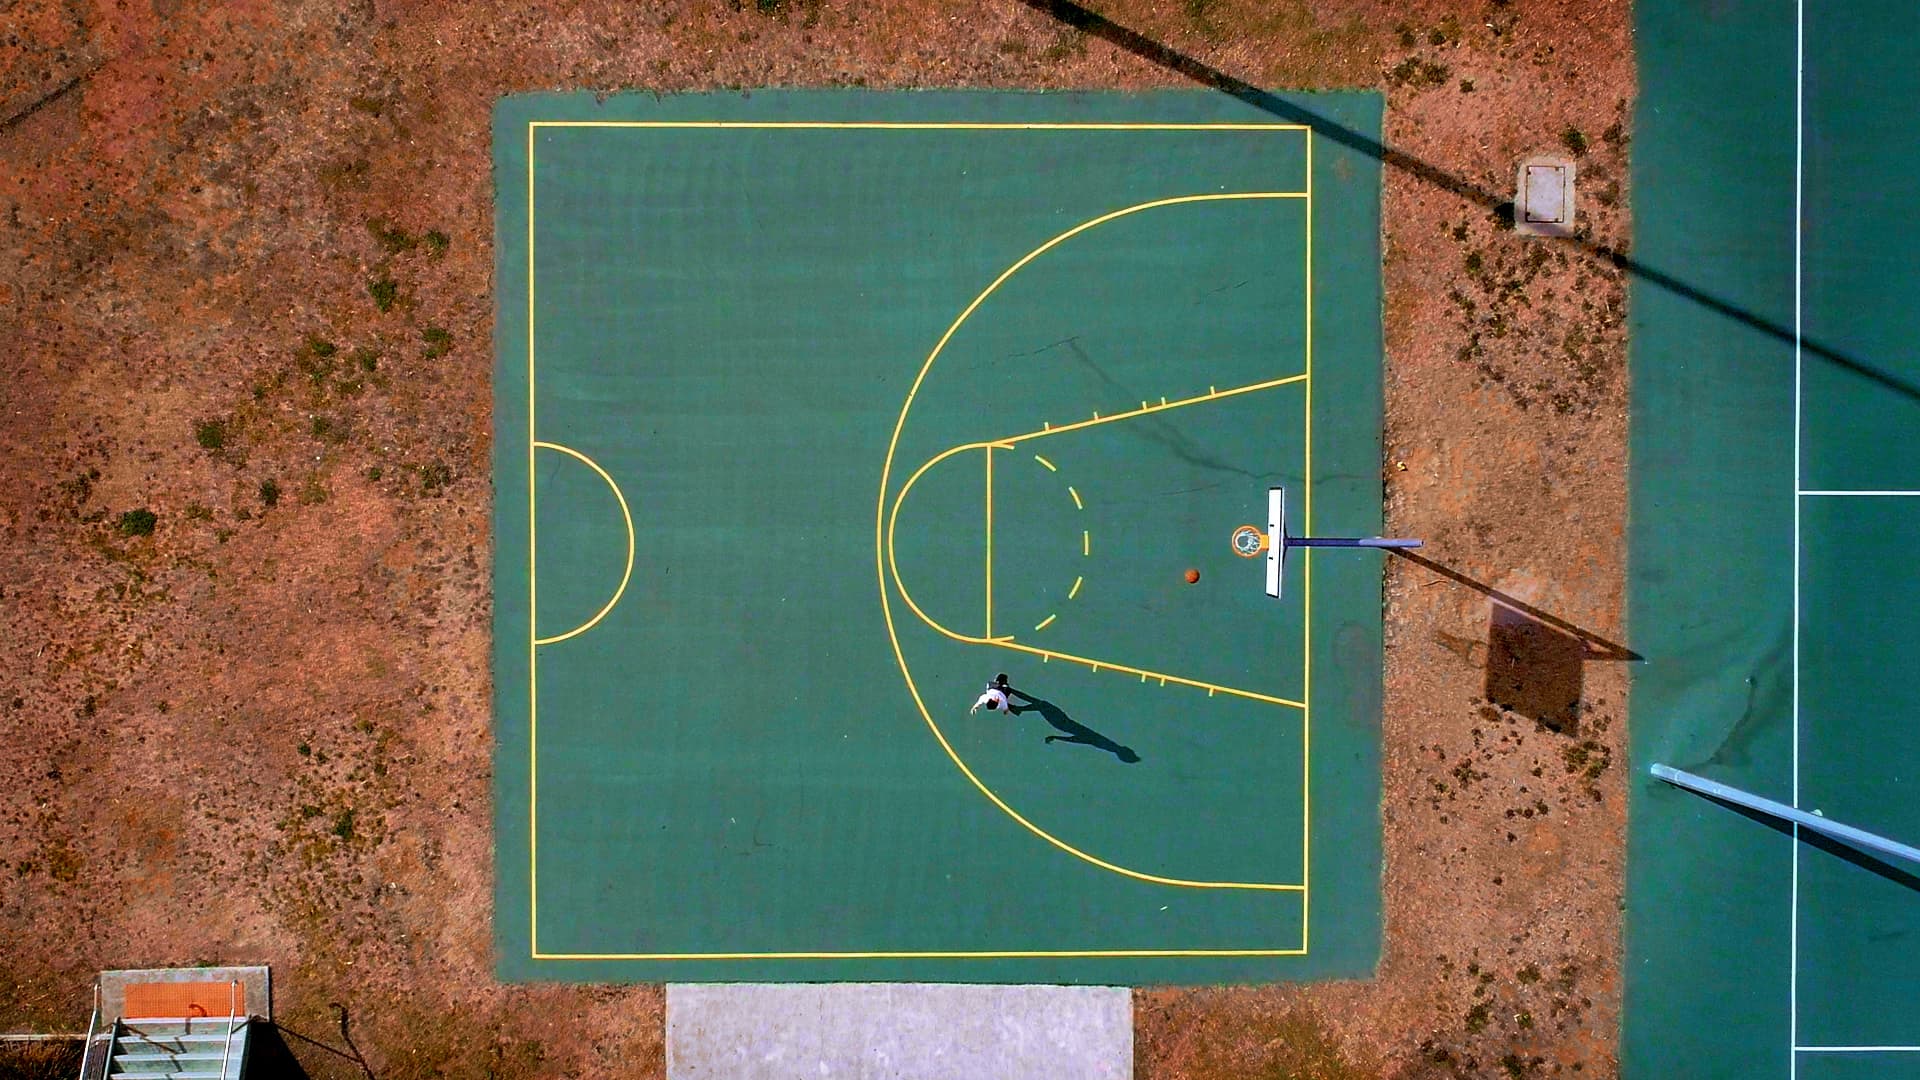 Aerial top-down shot of lone person on a basketball half-court shooting hoops.